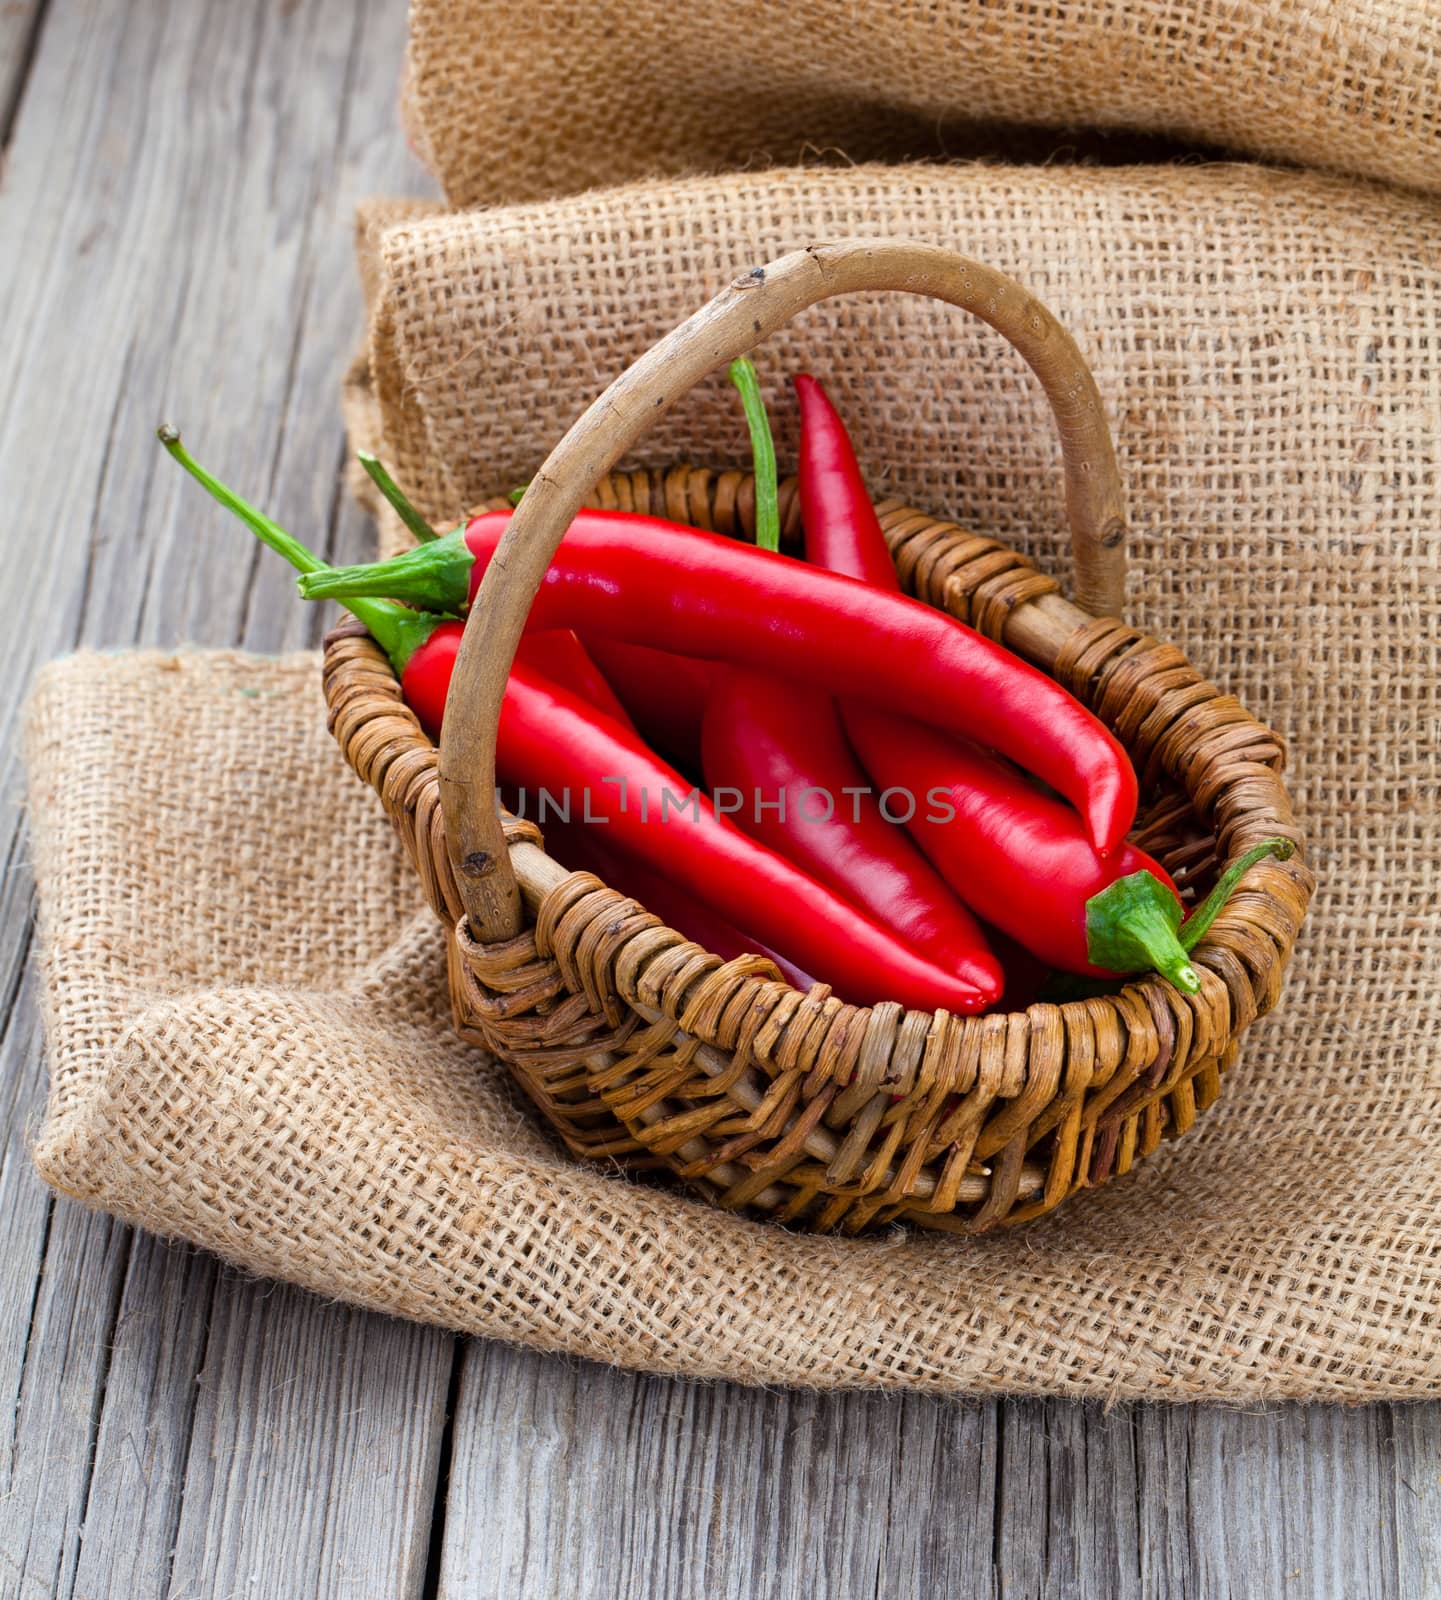 Red chili pepper in a wicker basket with burlap on the wooden background